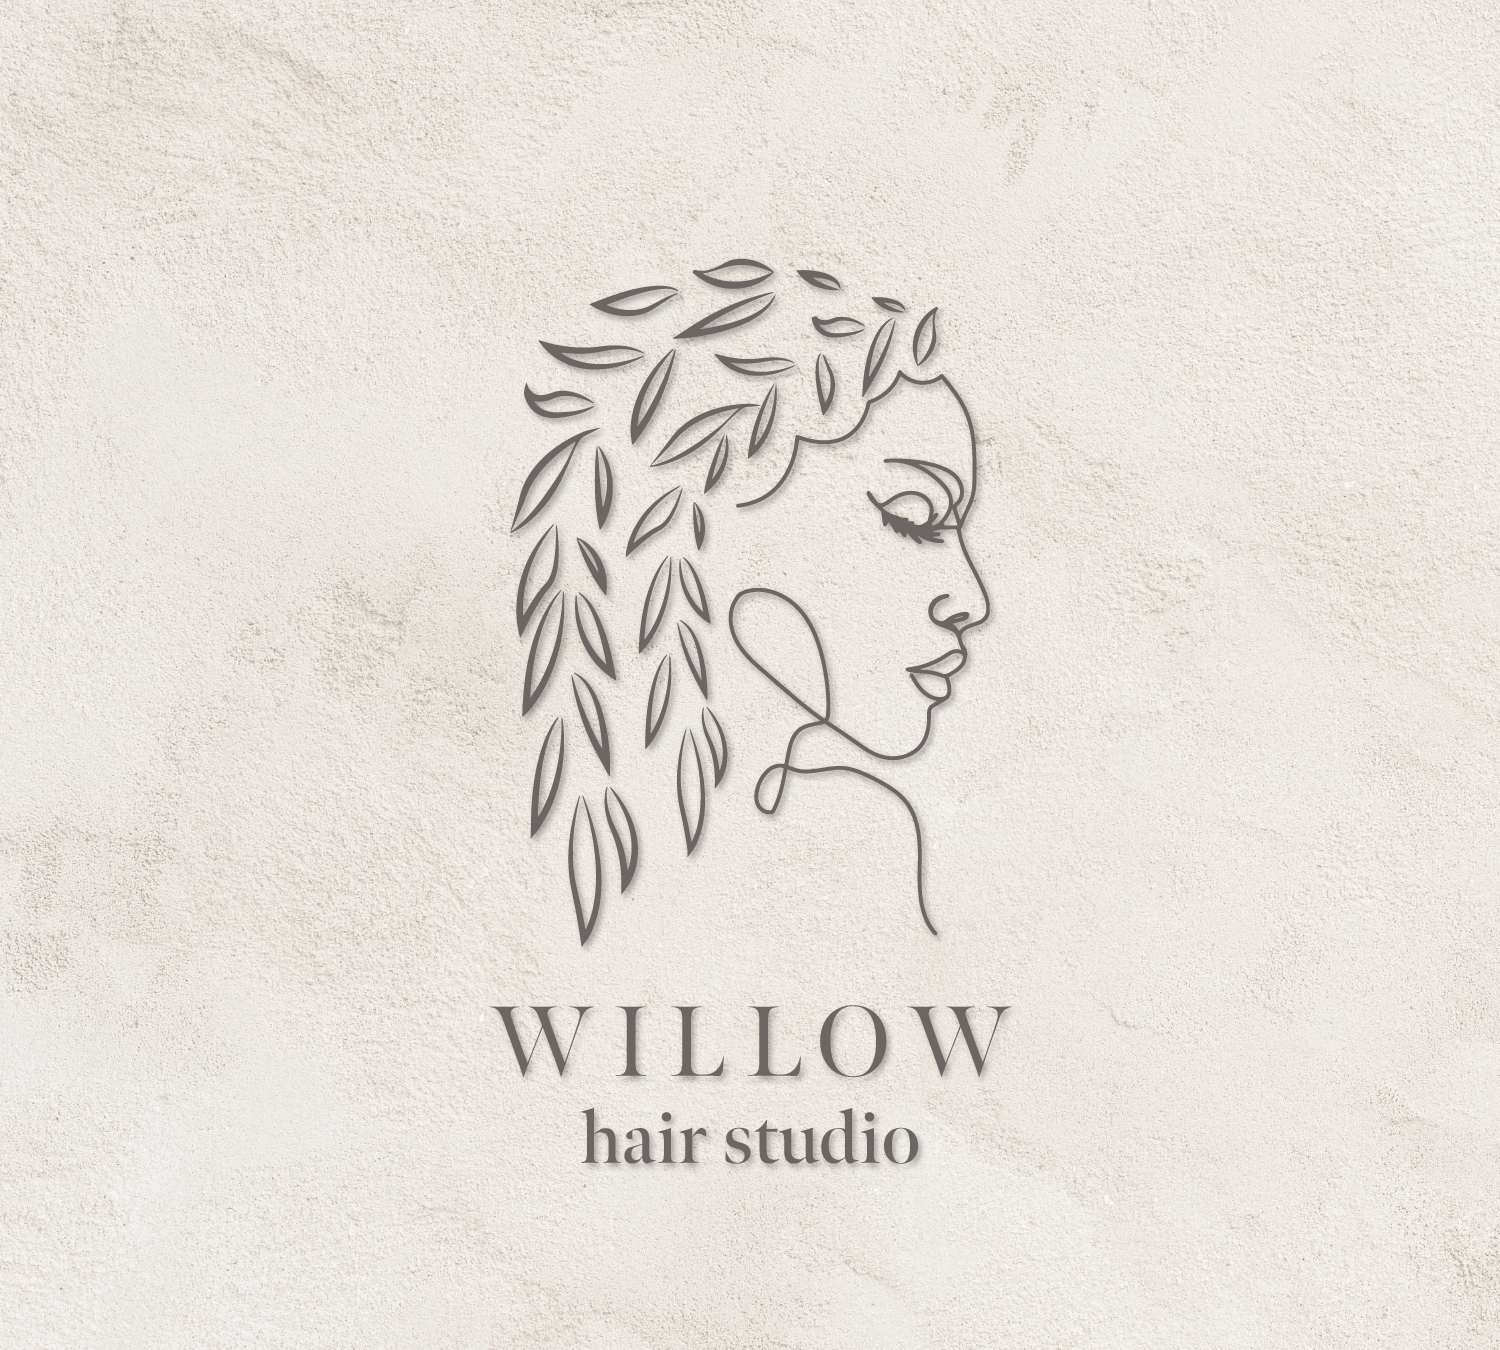 VP-Project2-WillowHairStudio-v1-02